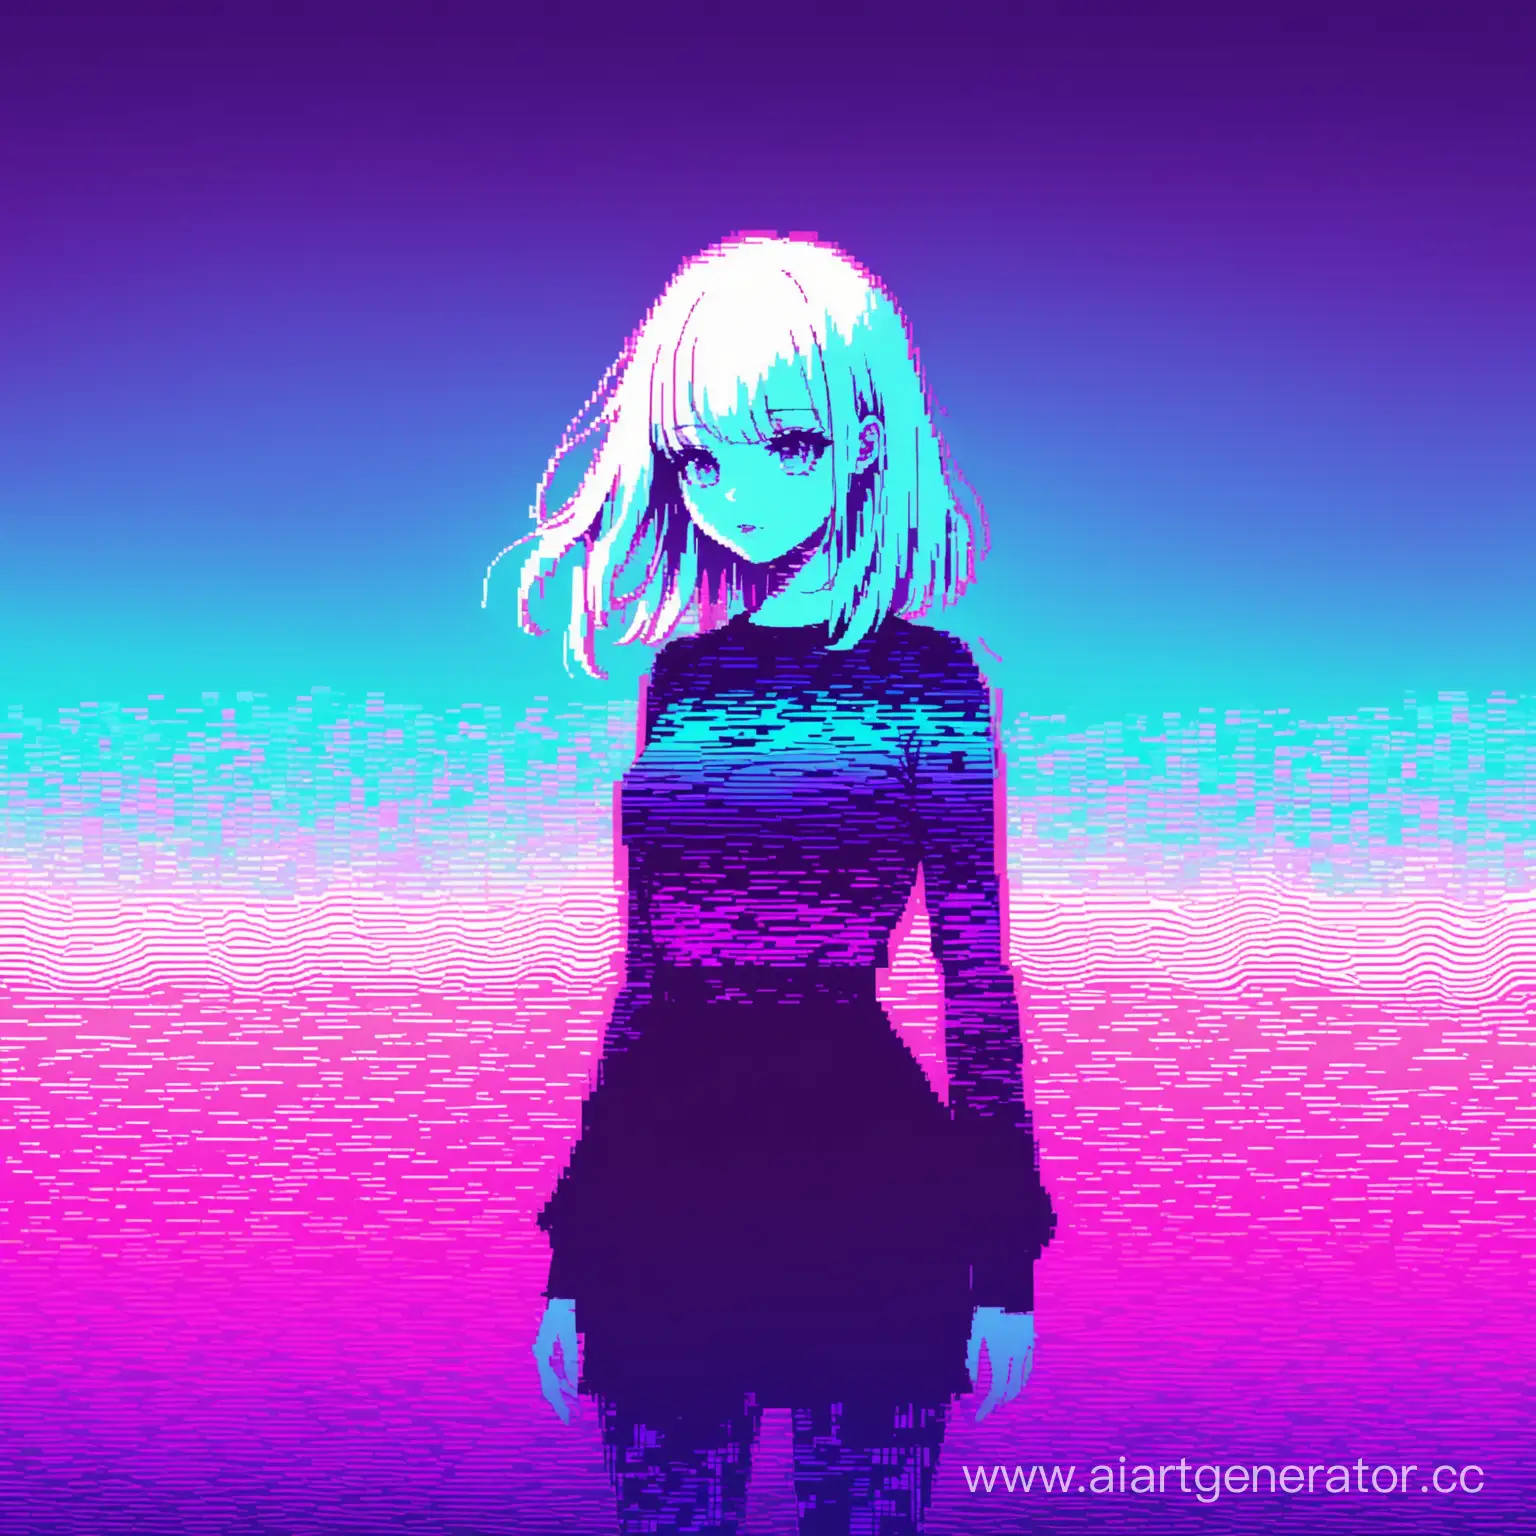 Gothic-Retro-Glitch-Art-Ethereal-Silhouette-of-a-Girl-in-PinkBlue-Pixel-Waves